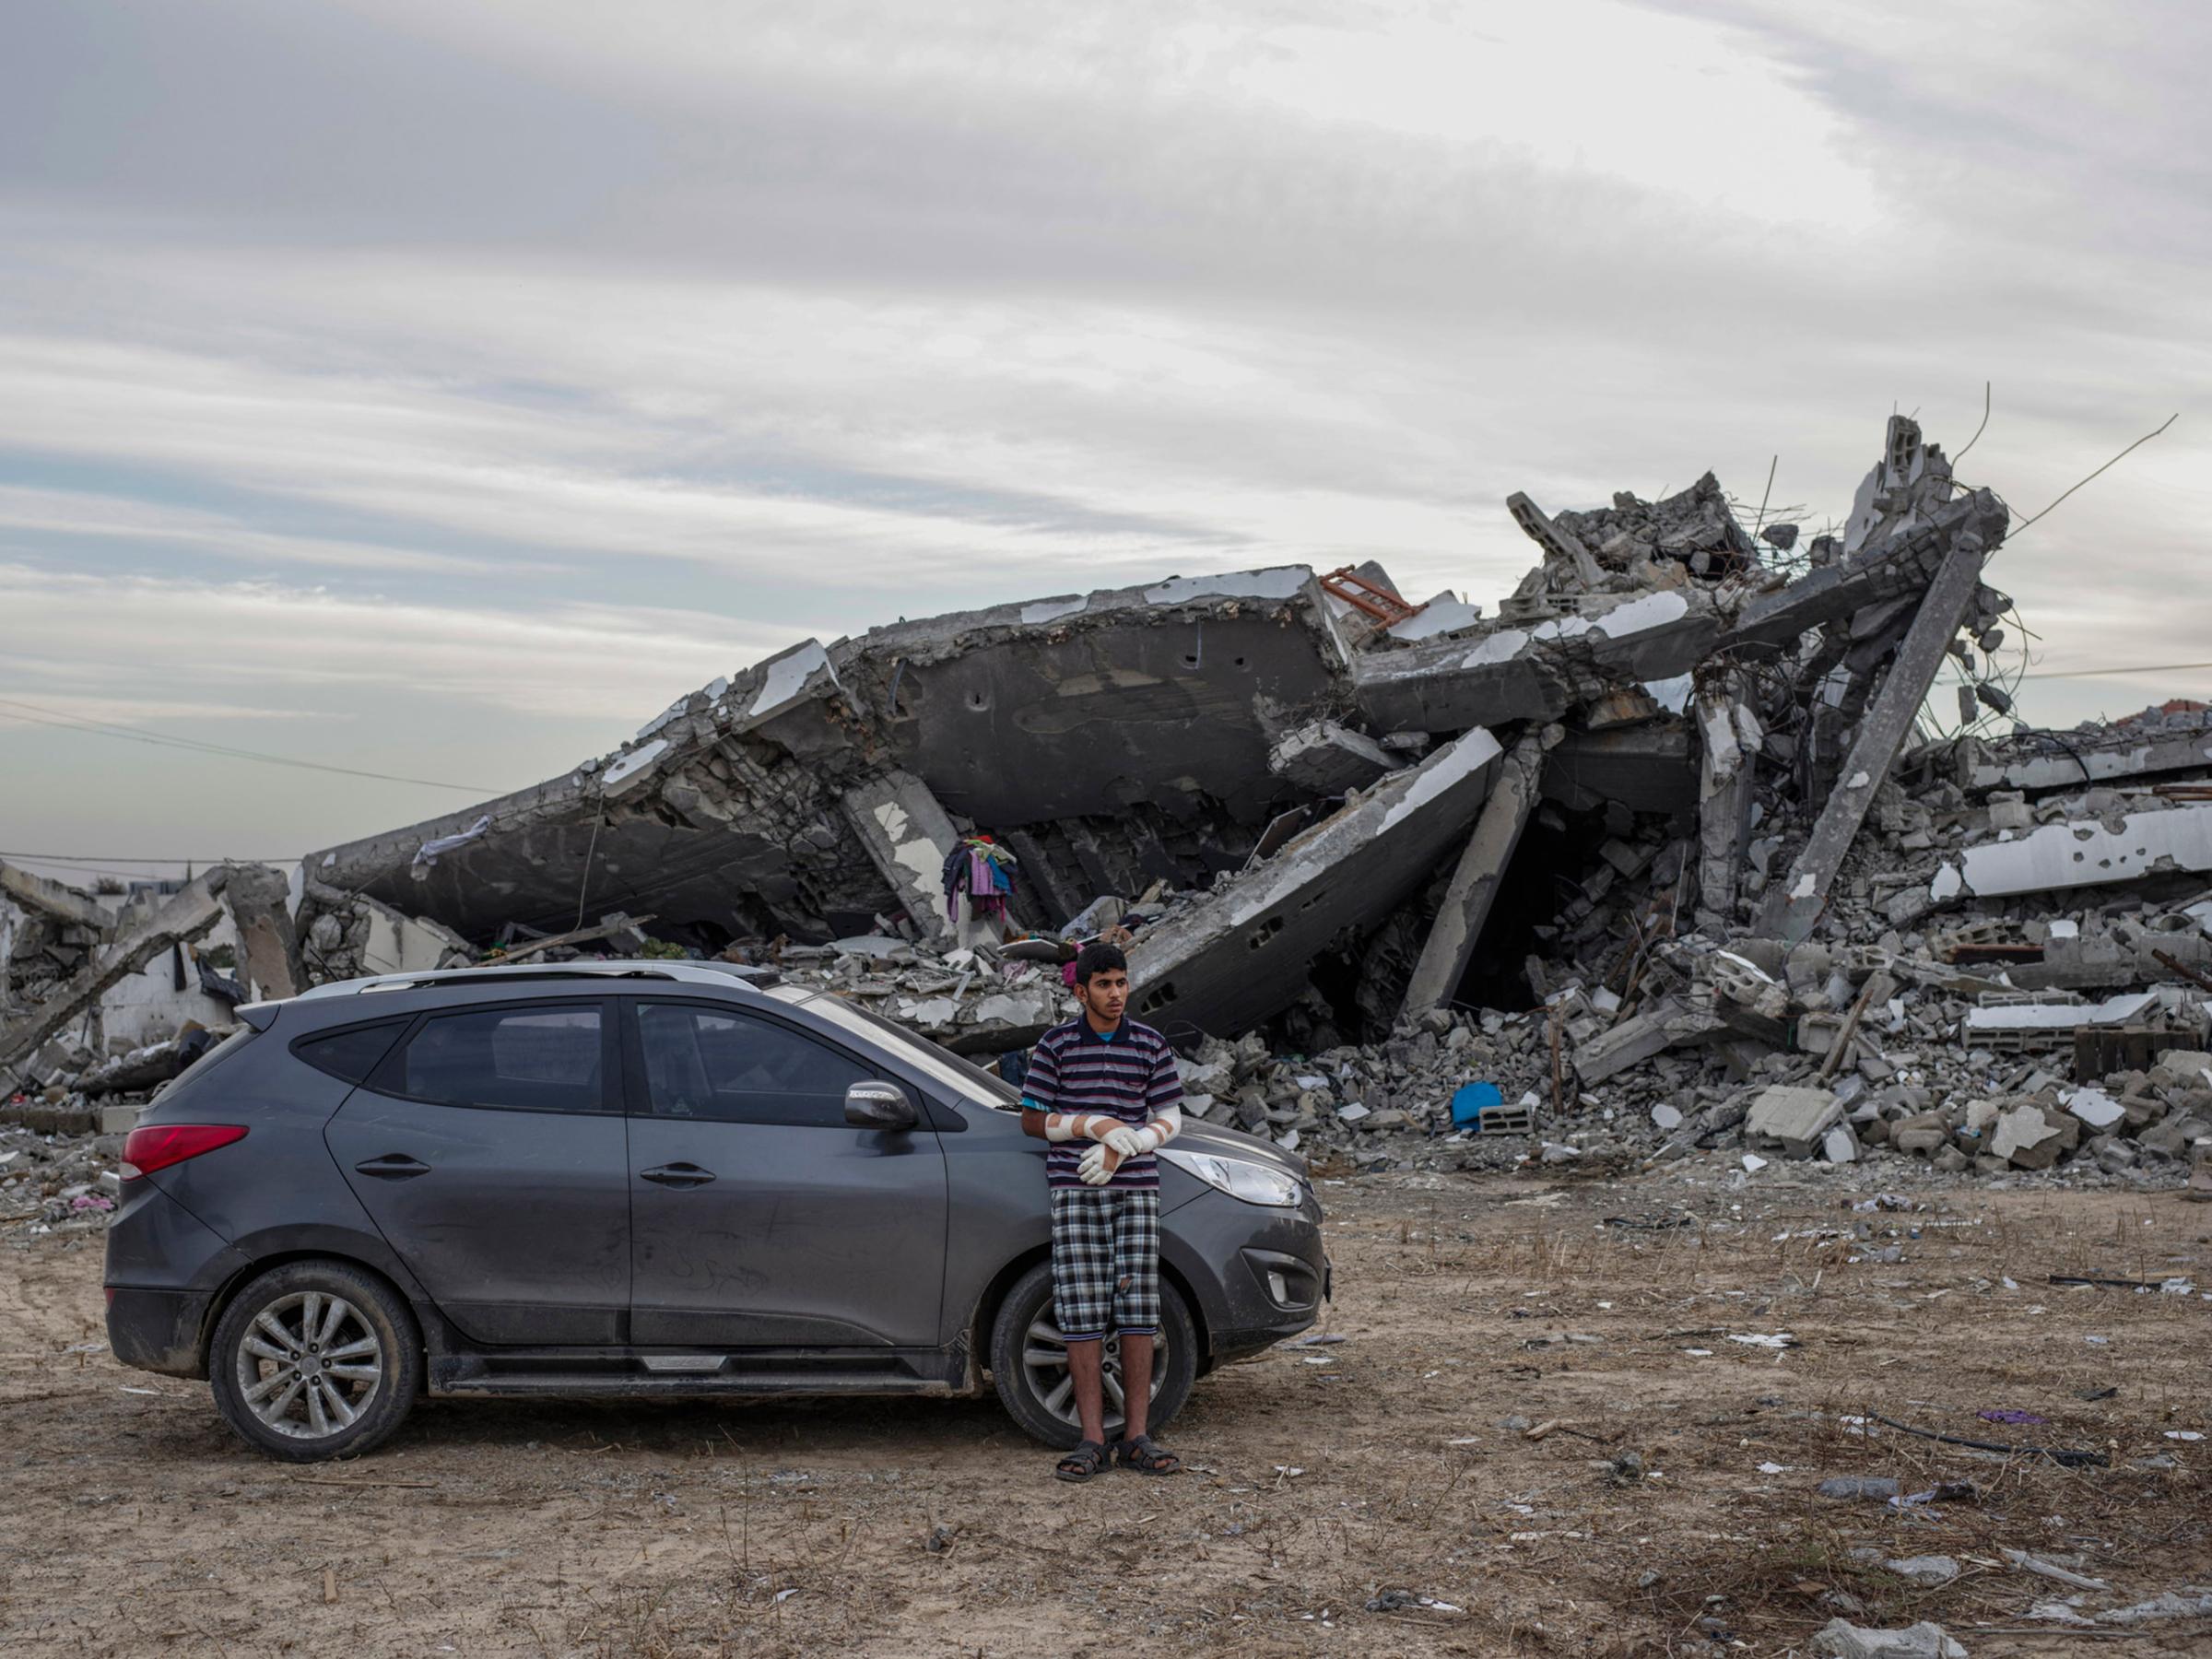 2014.  Gaza.  Palestine. Motaz Abu Aser, who badly injured both hands in an airstrike in the destroyed Shujai'iya neighborhood.  Operation Protective Edge lasted from 8 July 2014 – 26 August 2014, killing 2,189 Palestinians of which 1,486 are believed to be civilians. 66 Israeli soldiers and 6 civilians were killed.  It's estimated that 4,564 rockets were fired at Israel by Palestinian militants.